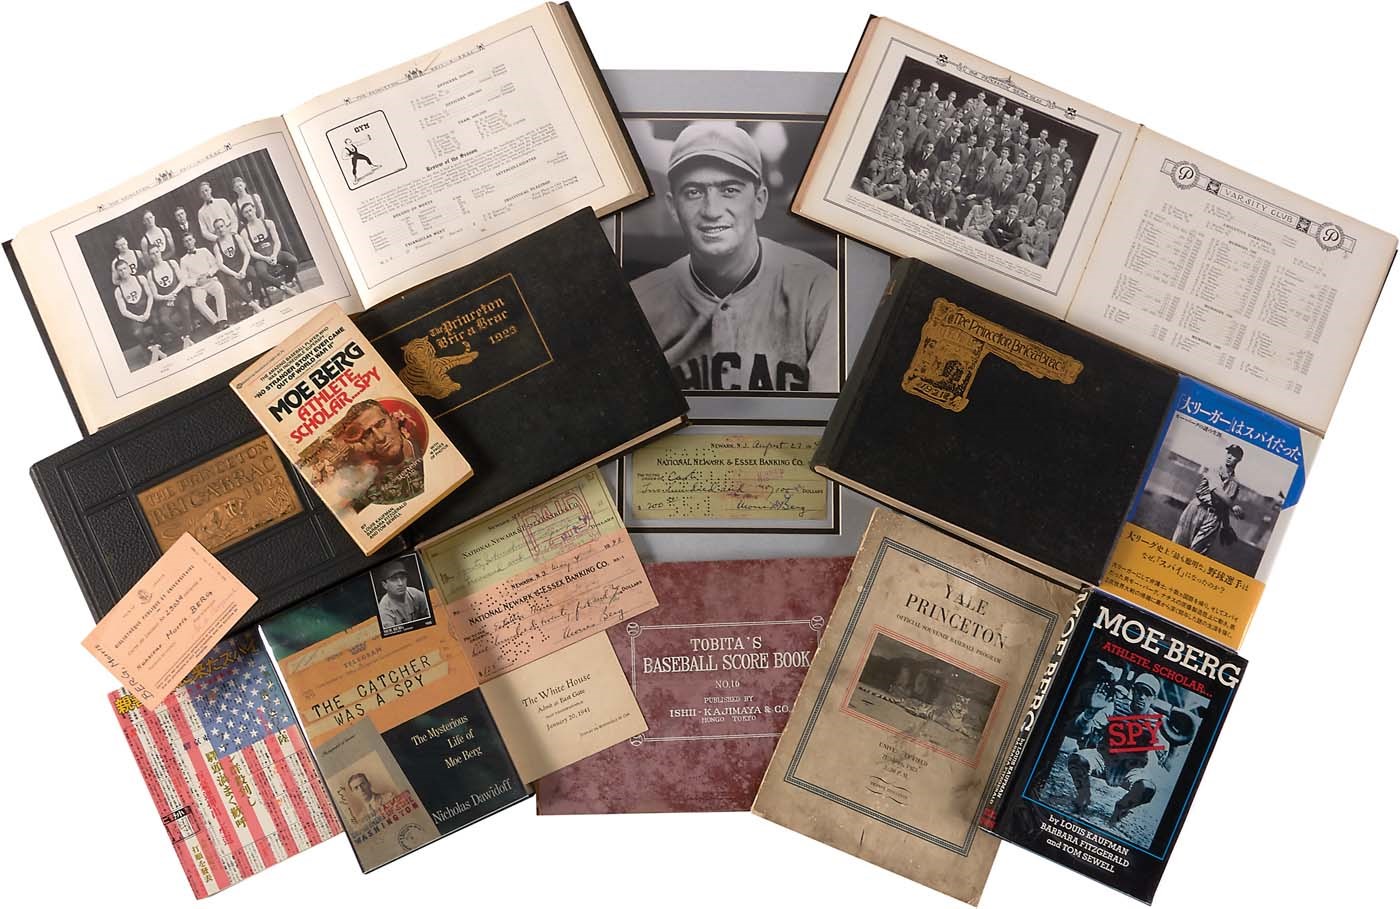 Boston Sports - Moe Berg Collection w/Autographs, Princeton Yearbooks & More (14)